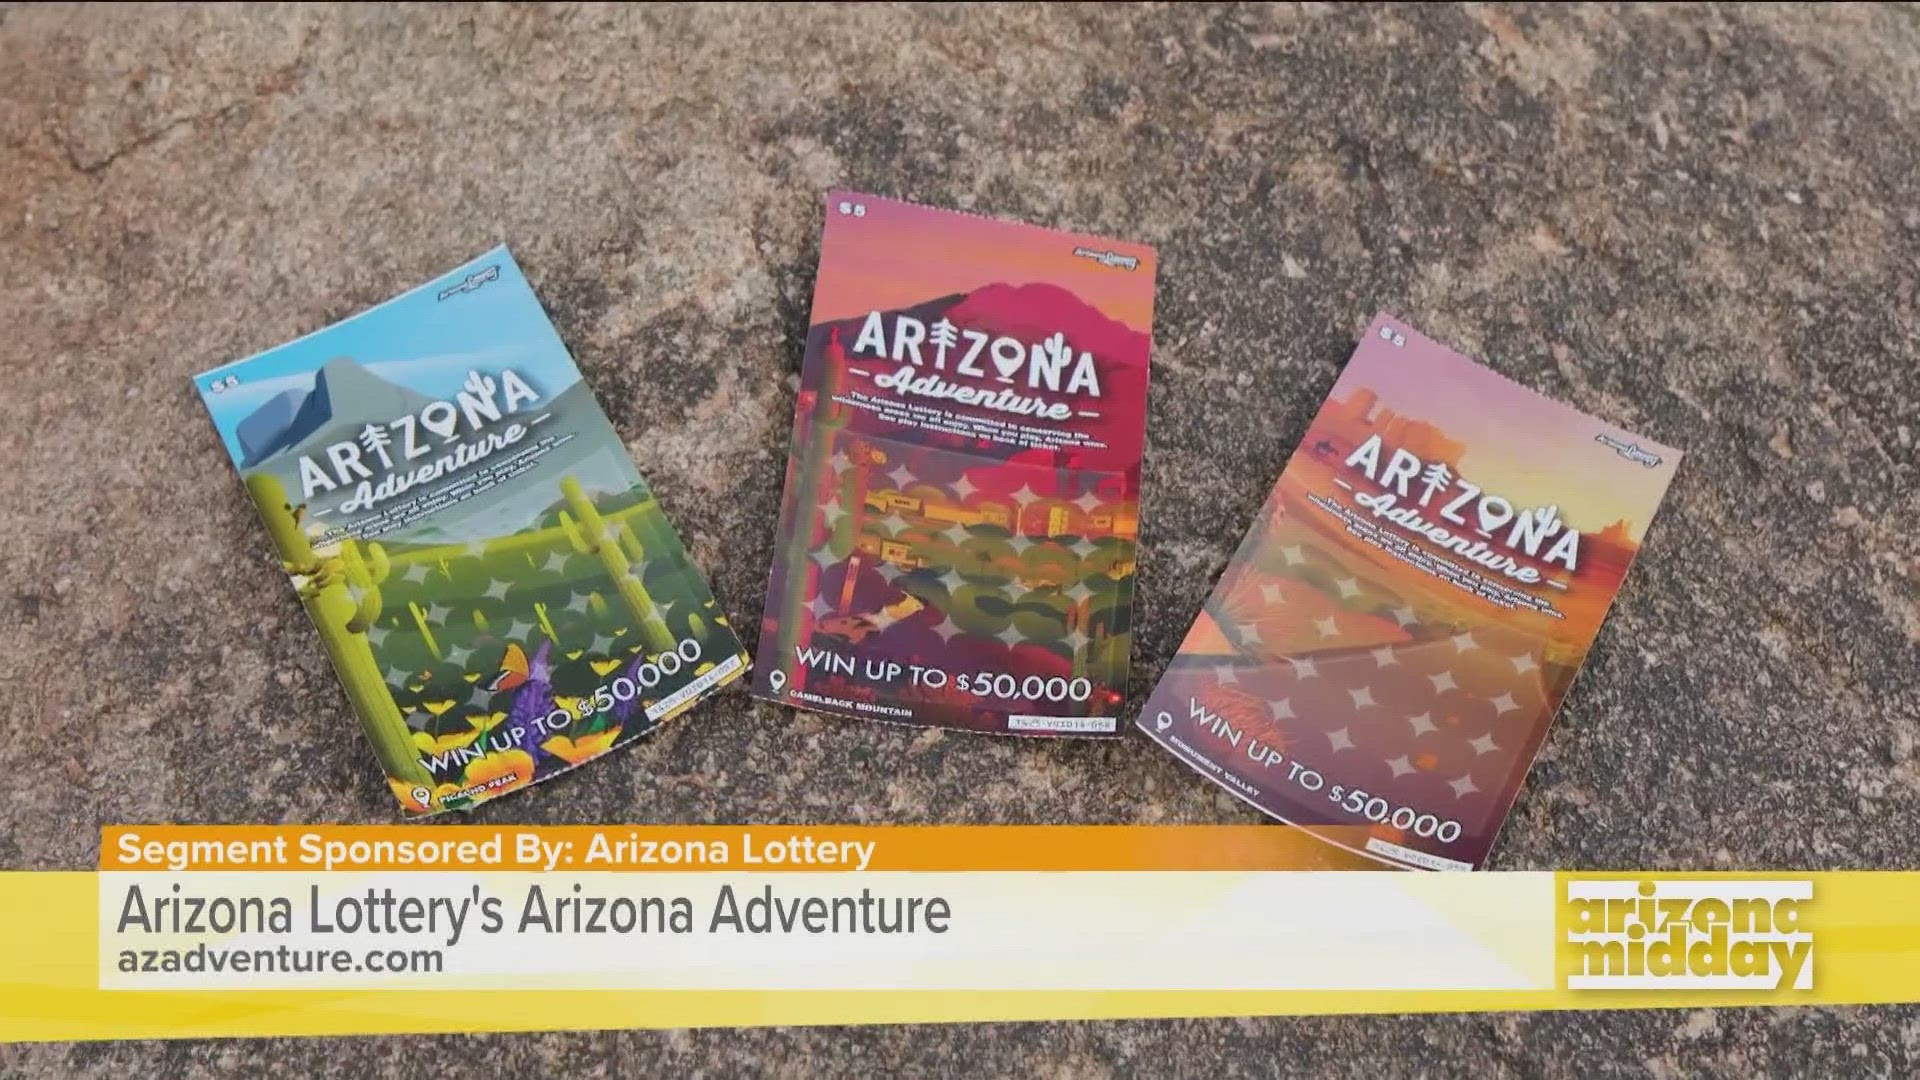 Alec Thomson, Arizona Lottery CEO, explains how the Arizona Adventure scratcher game works and how it contributes to environmental conservation initiatives.